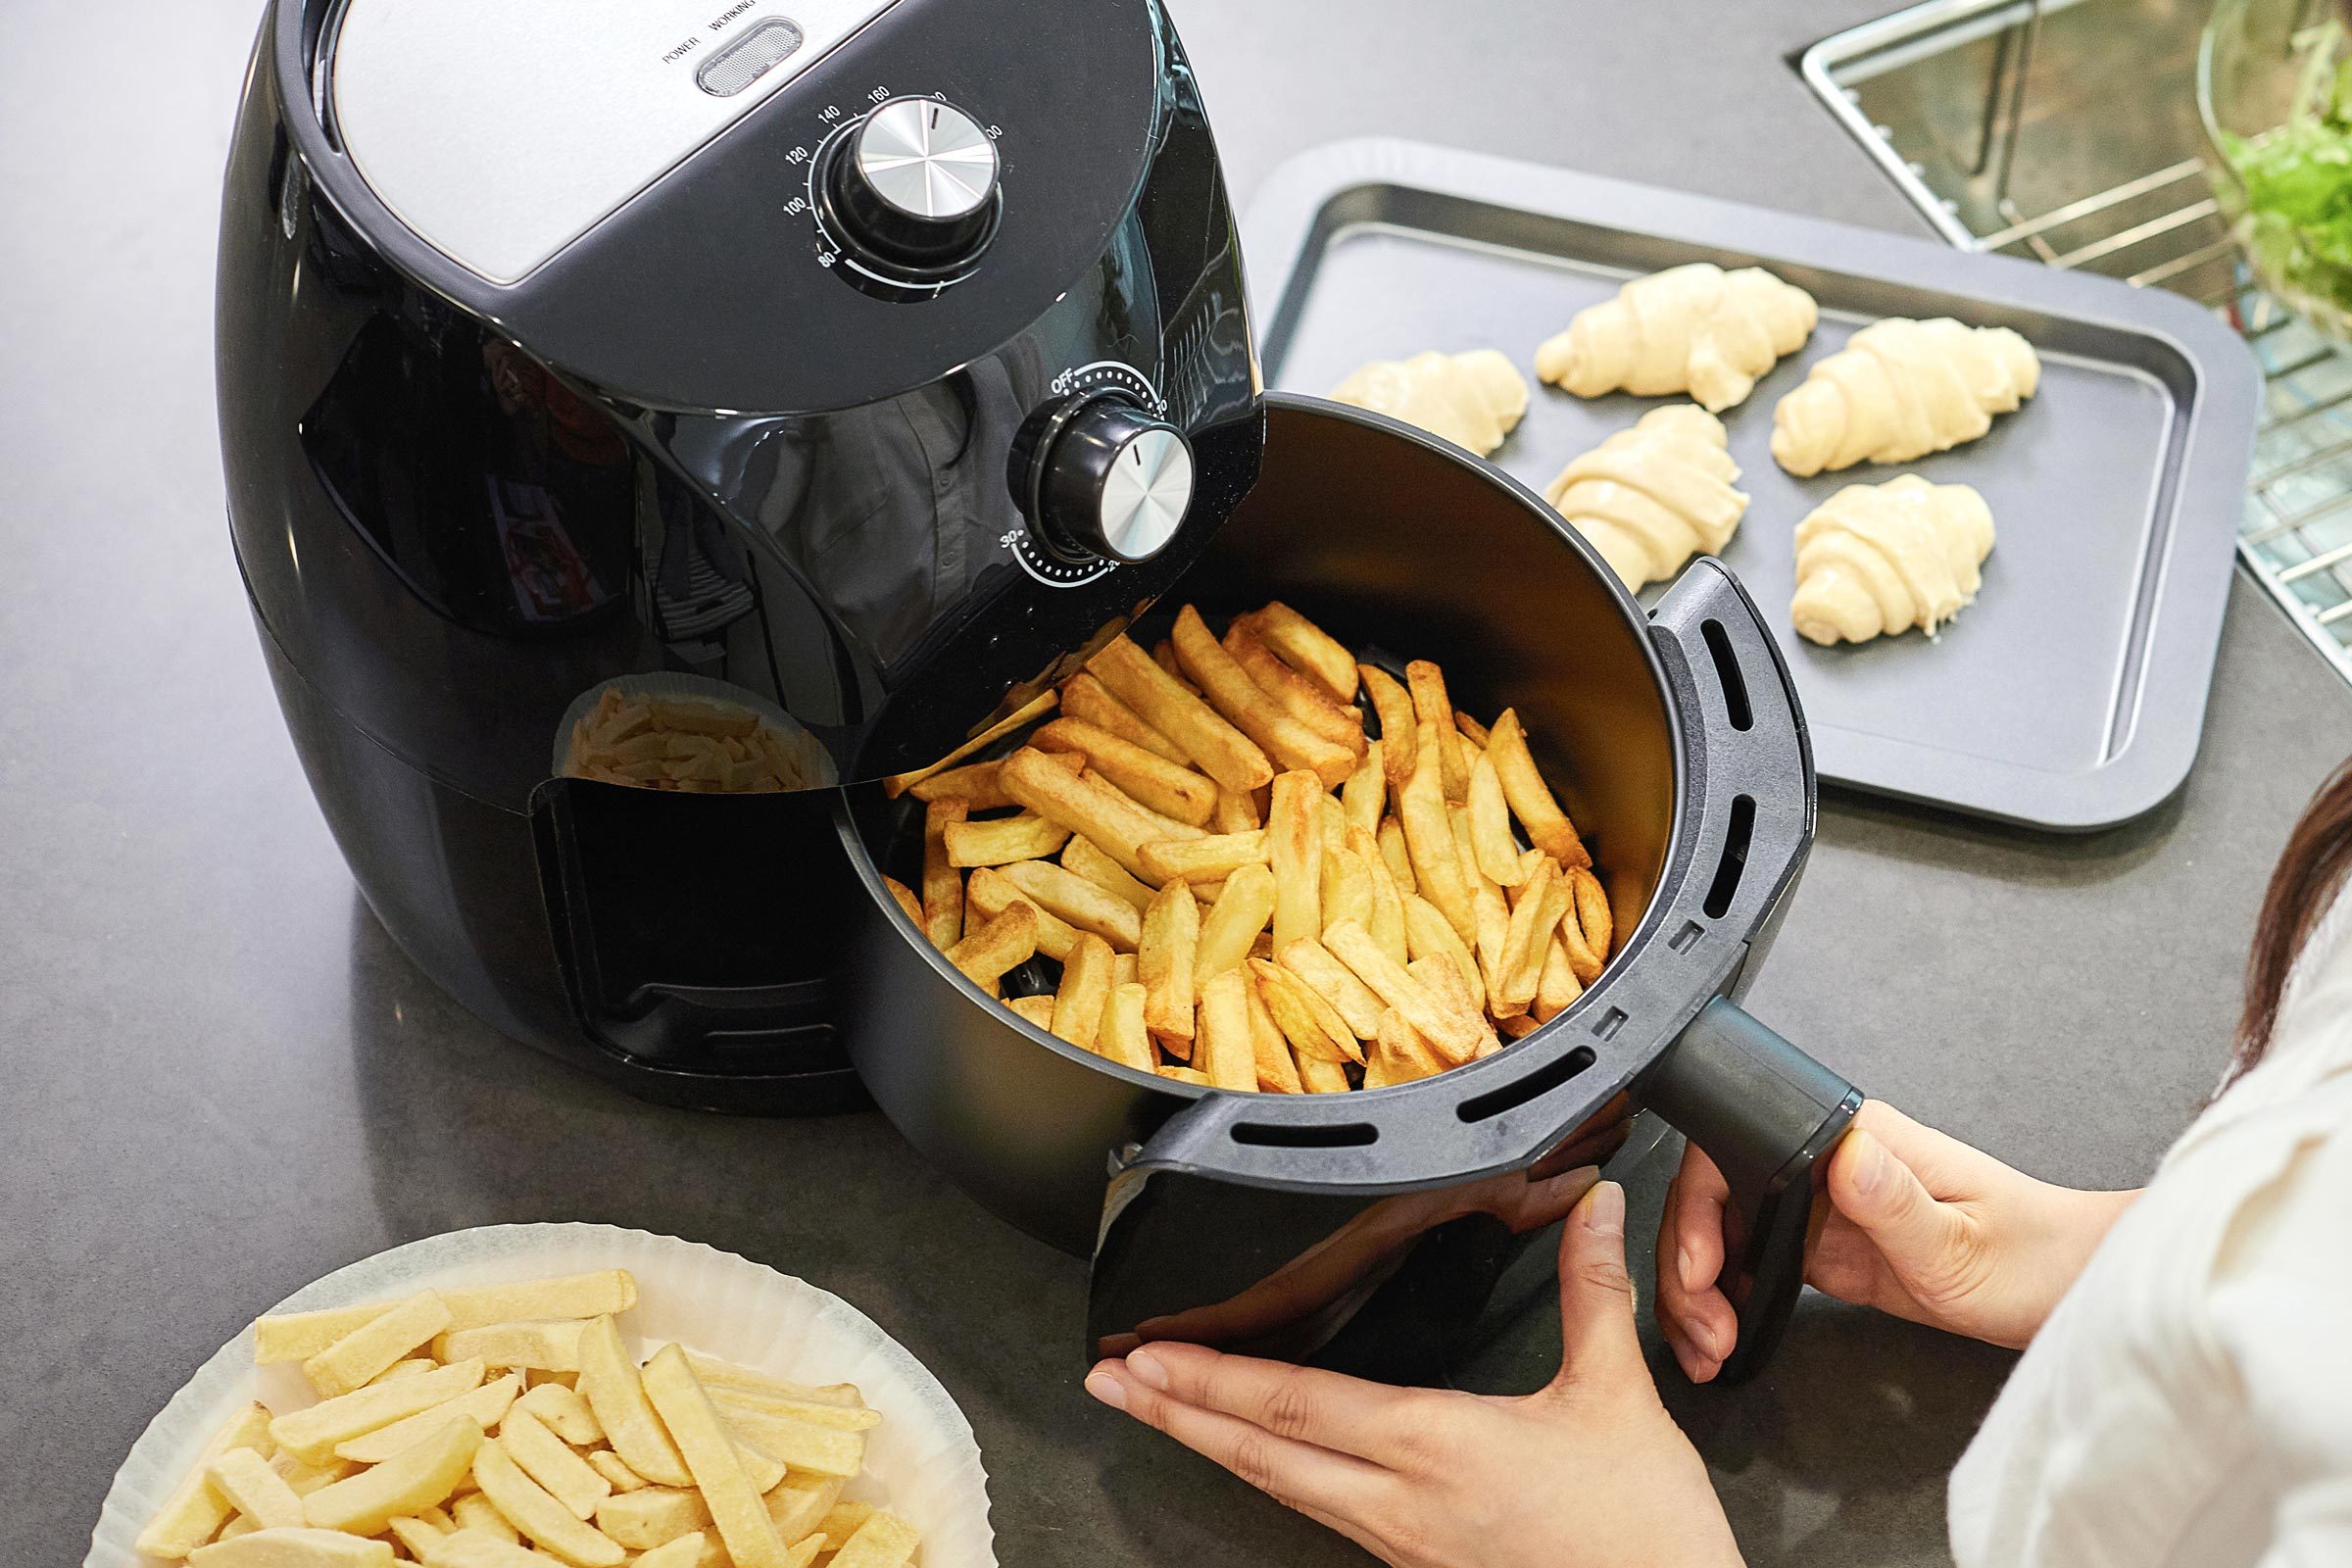 https://www.rd.com/wp-content/uploads/2020/10/RD-air-fryer-GettyImages-1310052545.jpg?fit=700%2C467